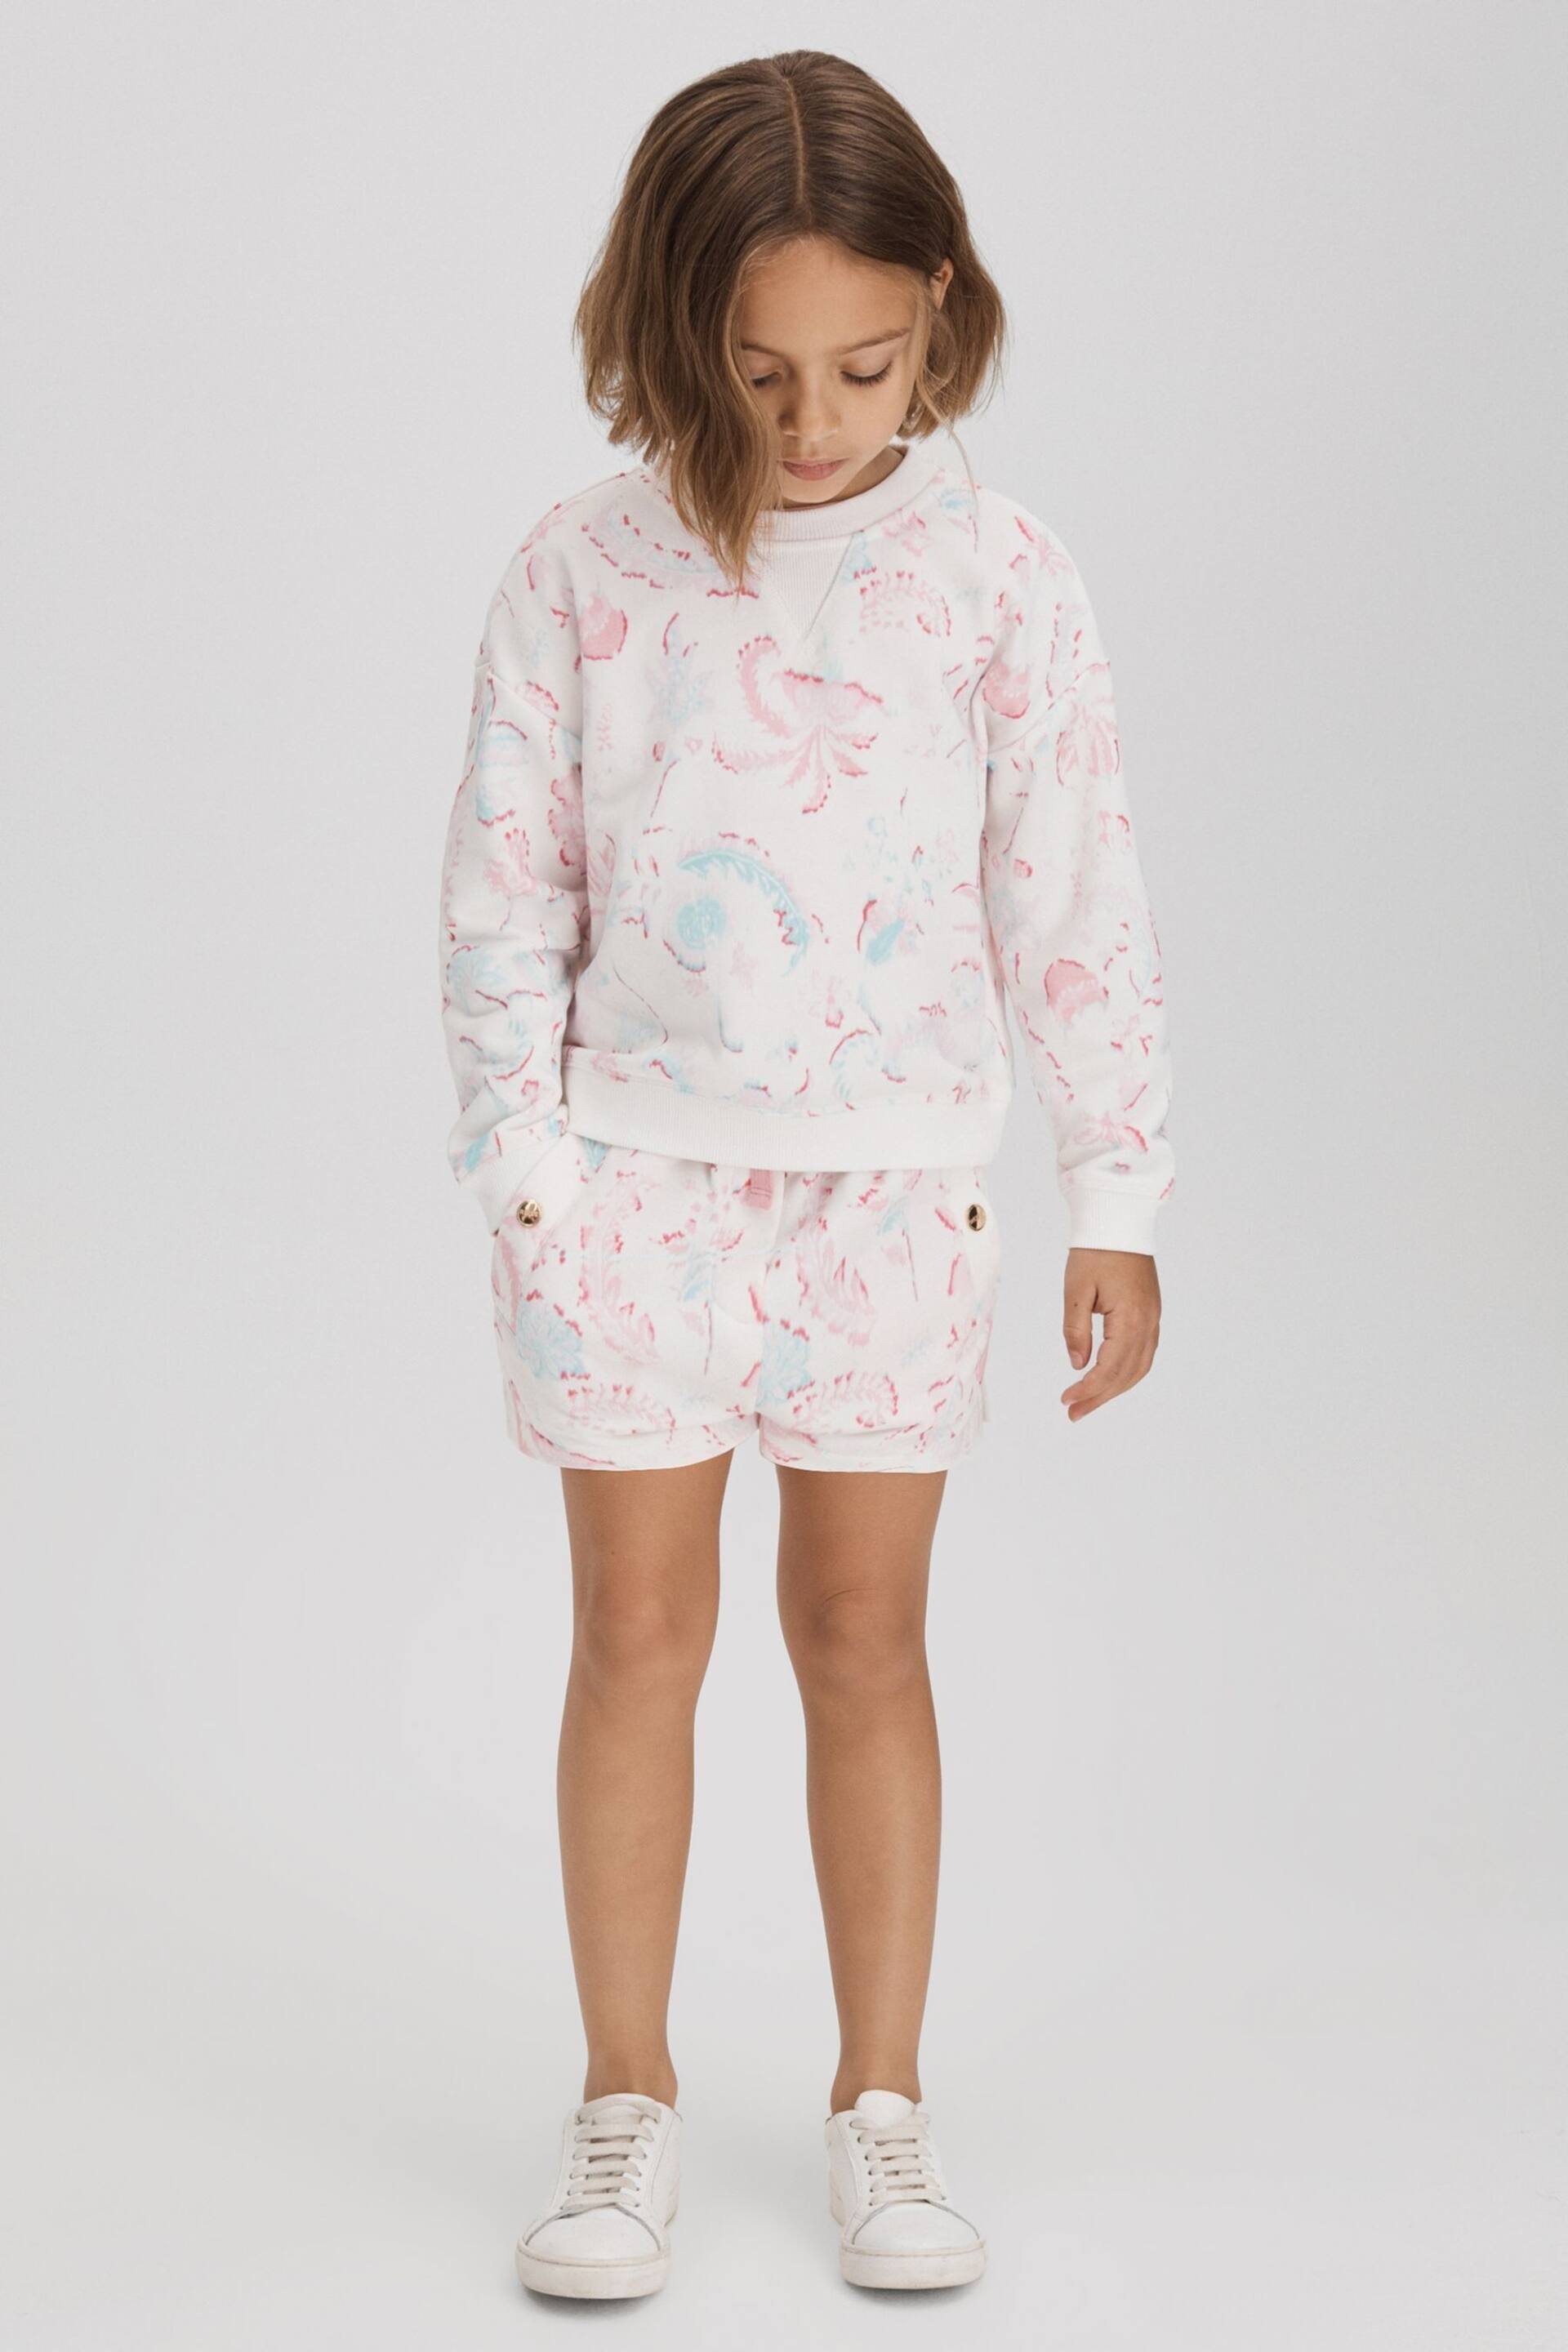 Reiss Pink Jessie Teen Crew Neck Jumper and Shorts Set - Image 3 of 7